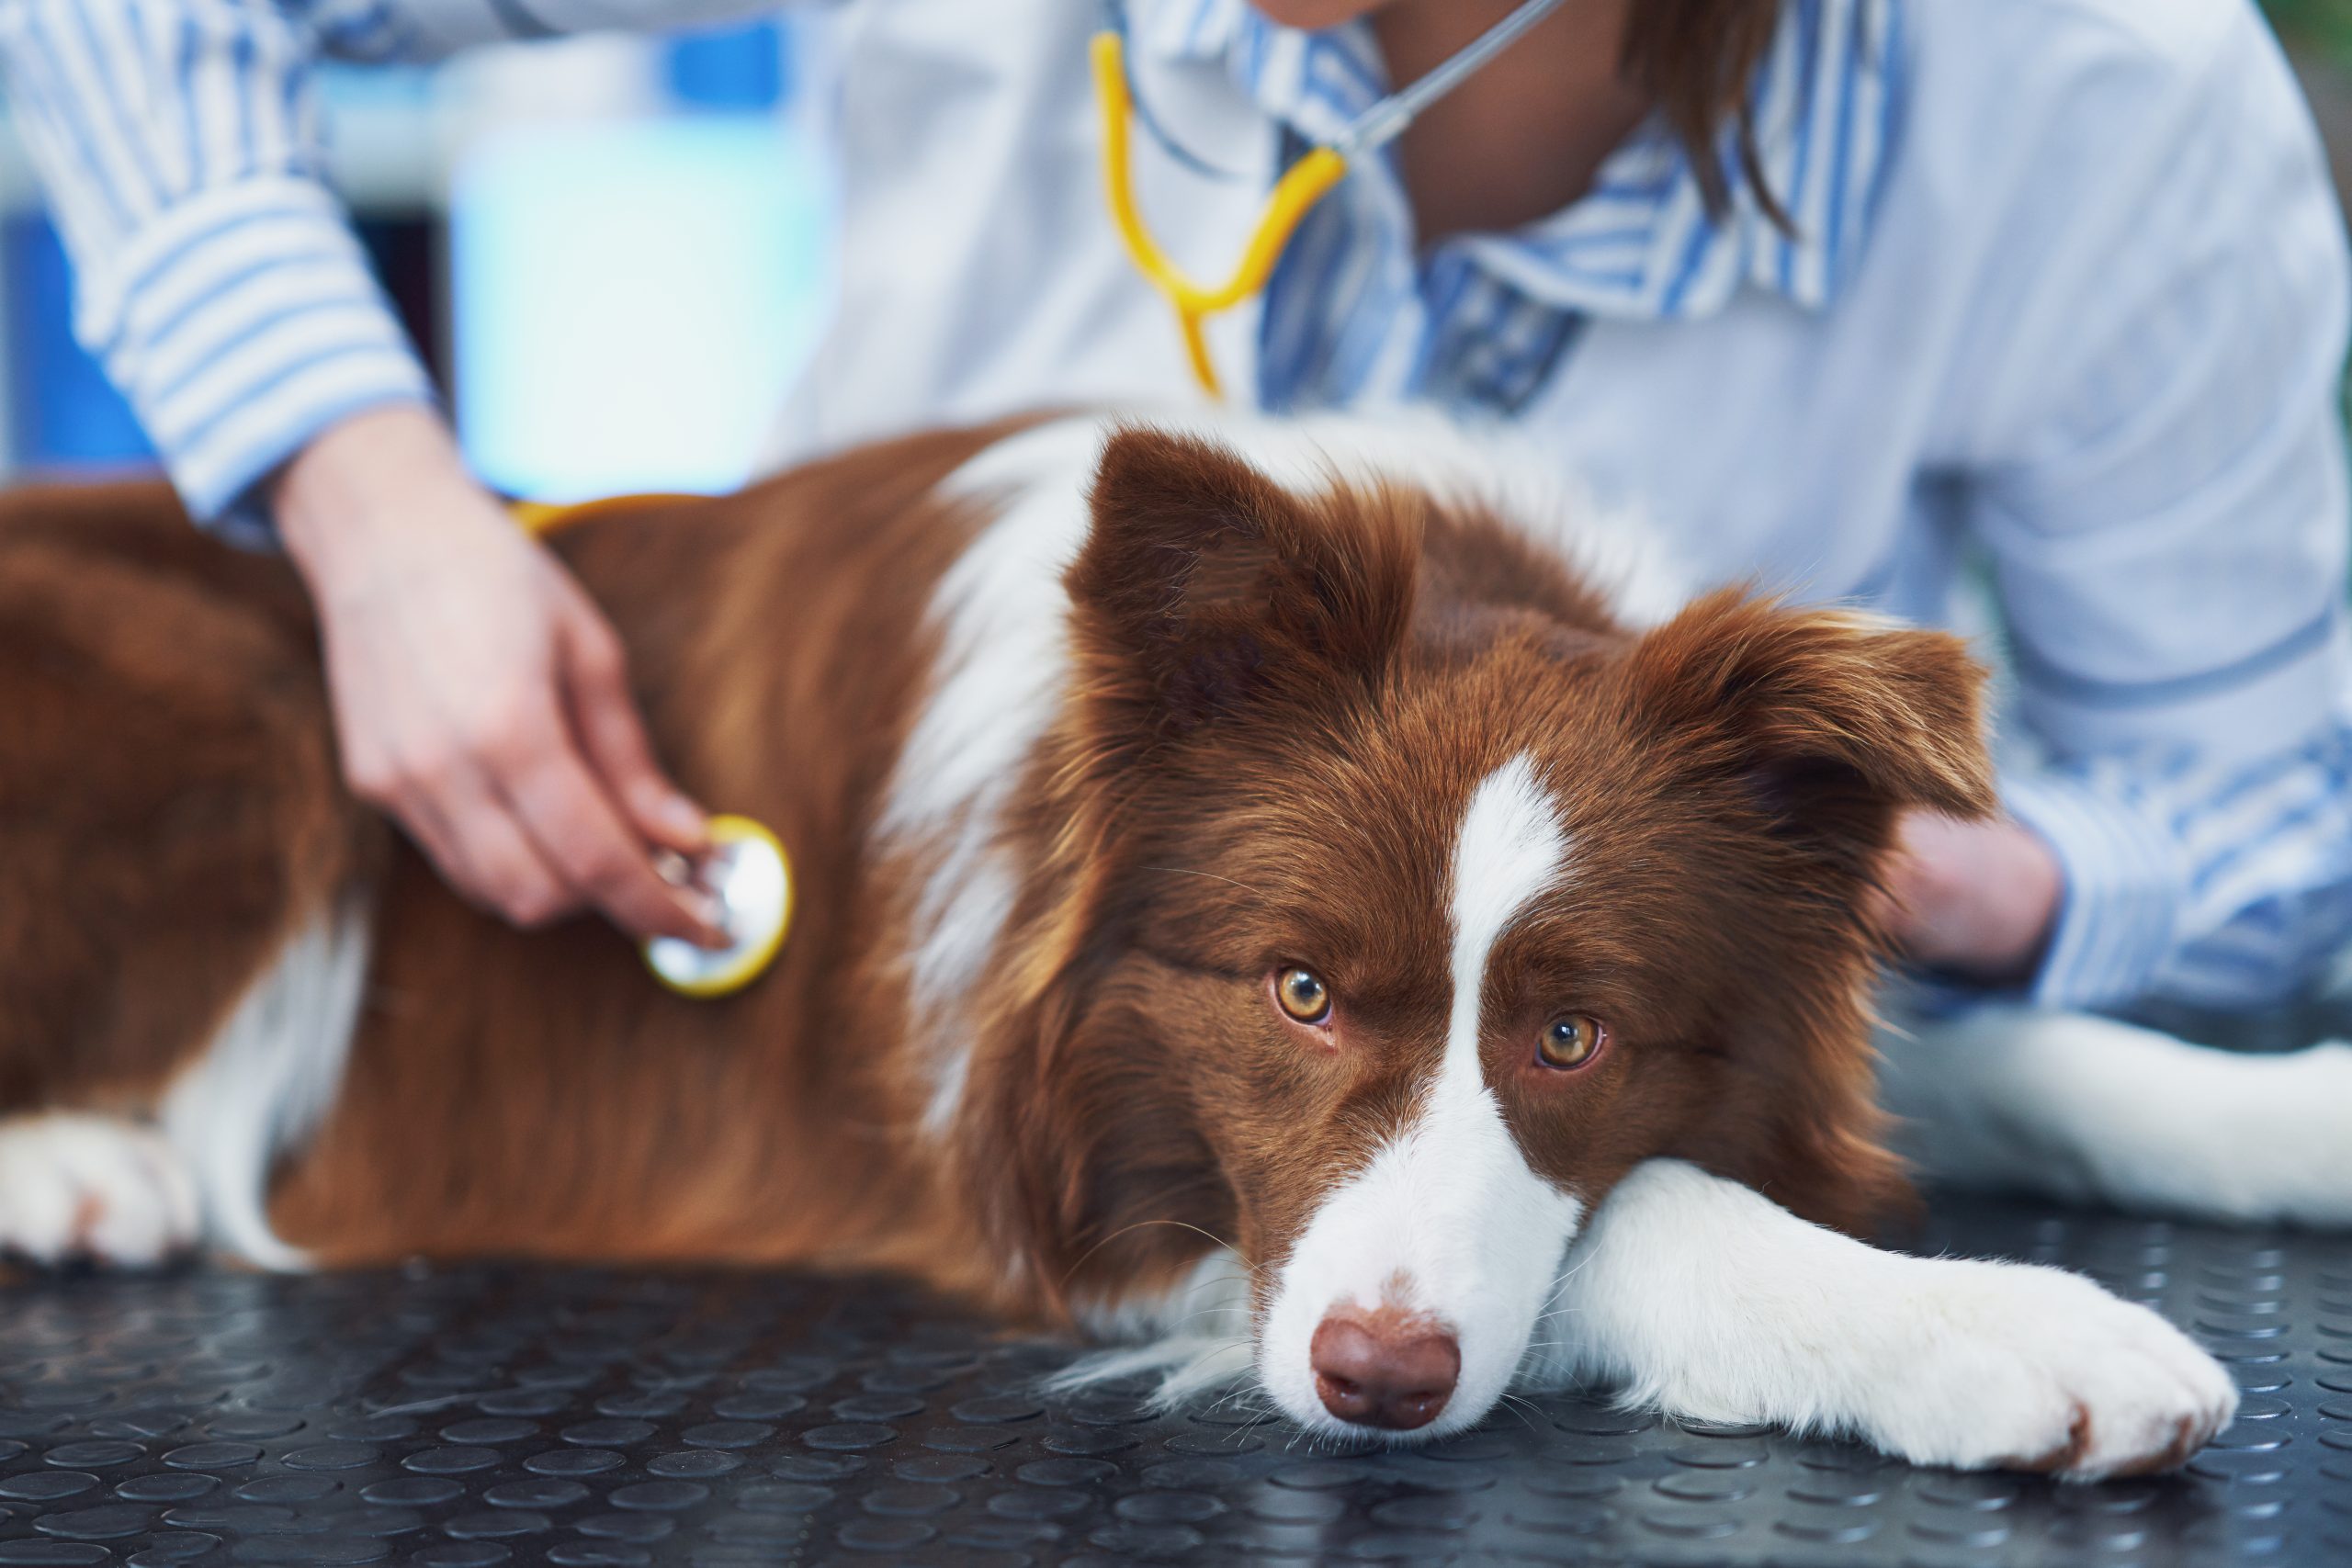 Pet insurance provides coverage for critical and emergency care services.